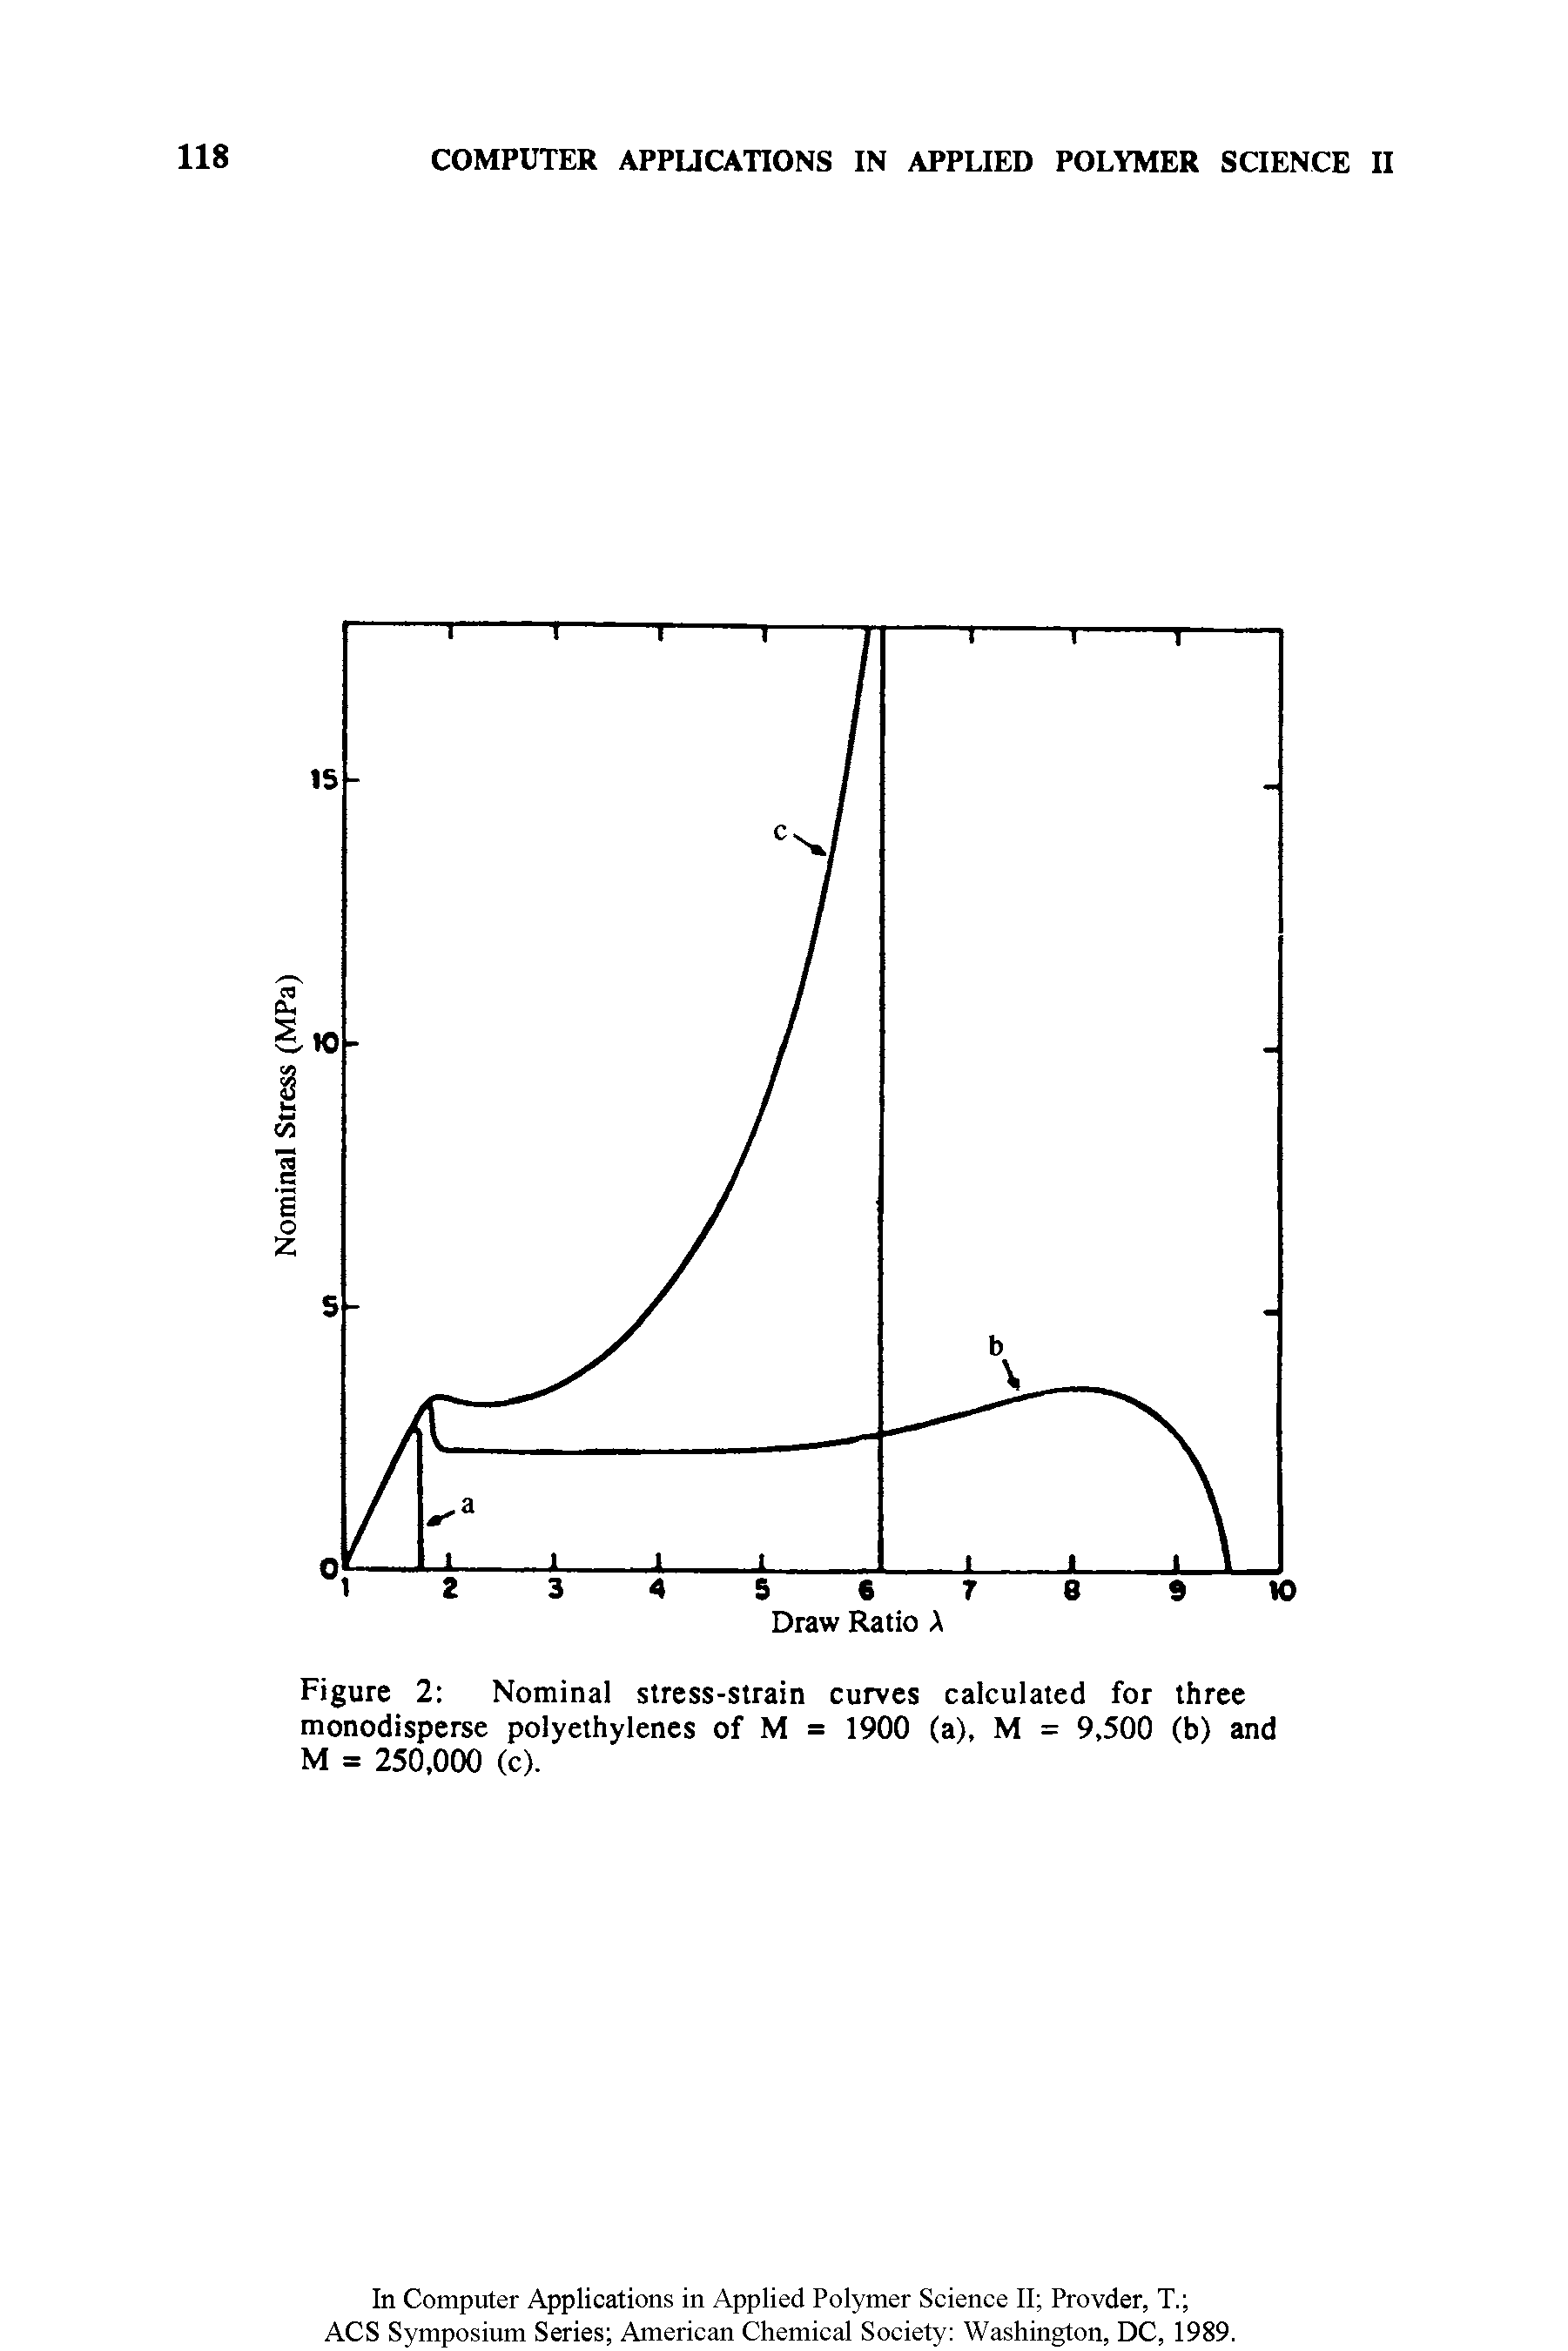 Figure 2 Nominal stress-strain curves calculated for three monodisperse polyethylenes of M = 1900 (a), M = 9,500 (b) and M = 250,000 (c).